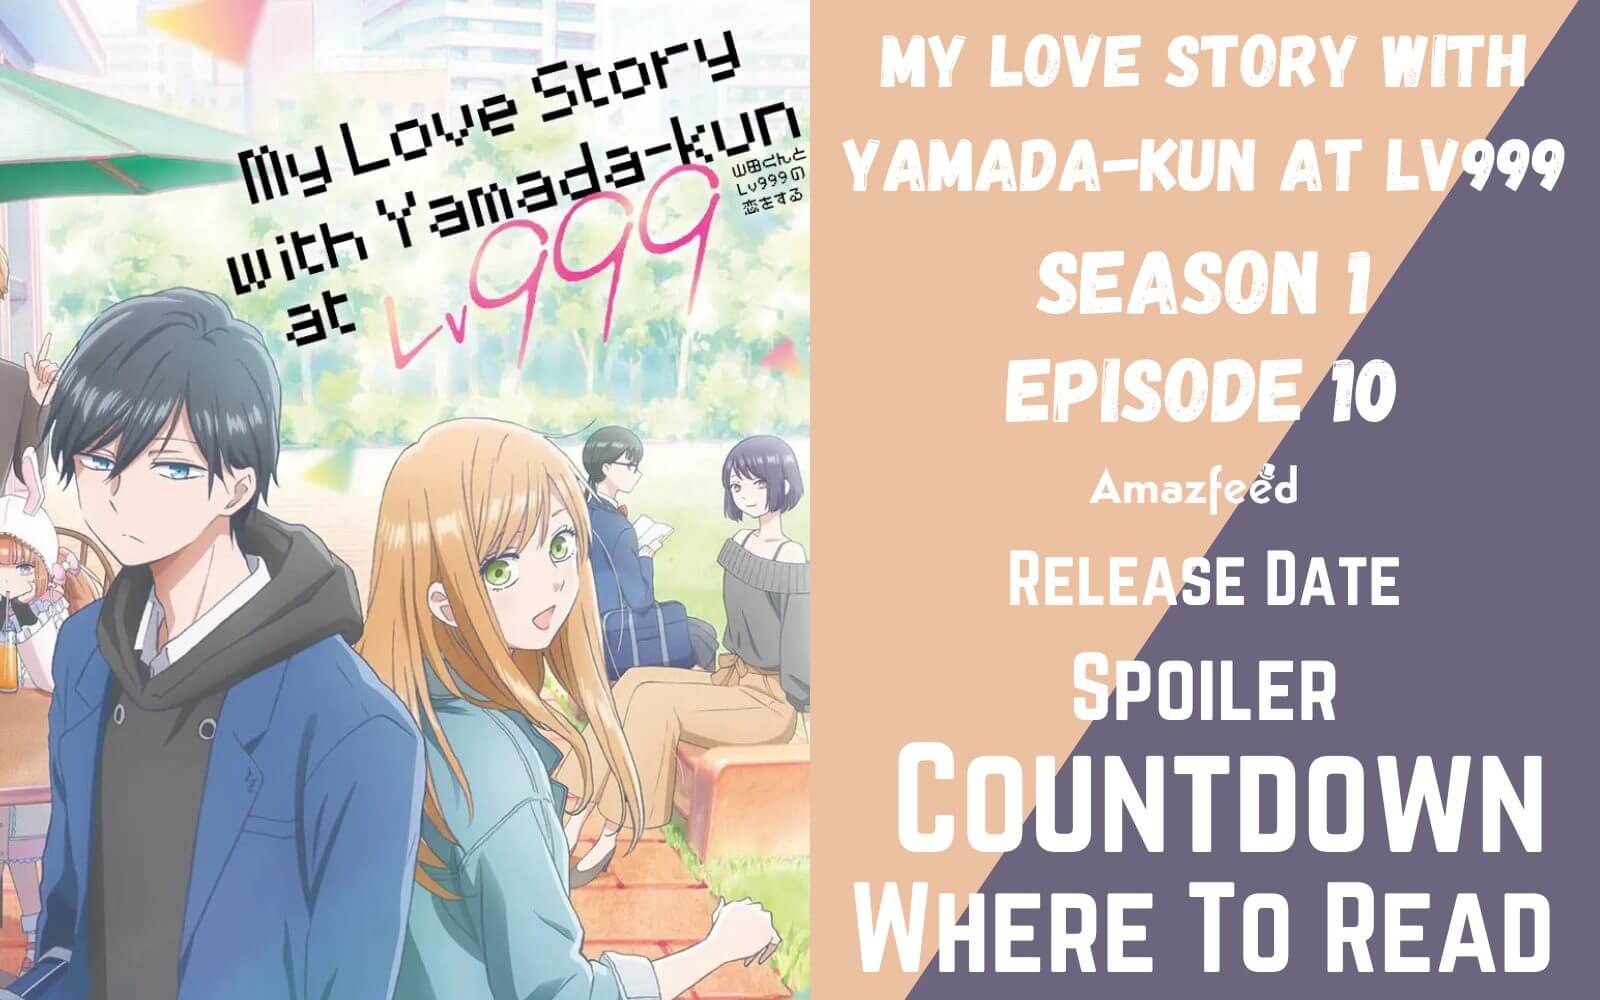 My Love Story with Yamada-kun at Lv999 Episode 10 Release Date & Time